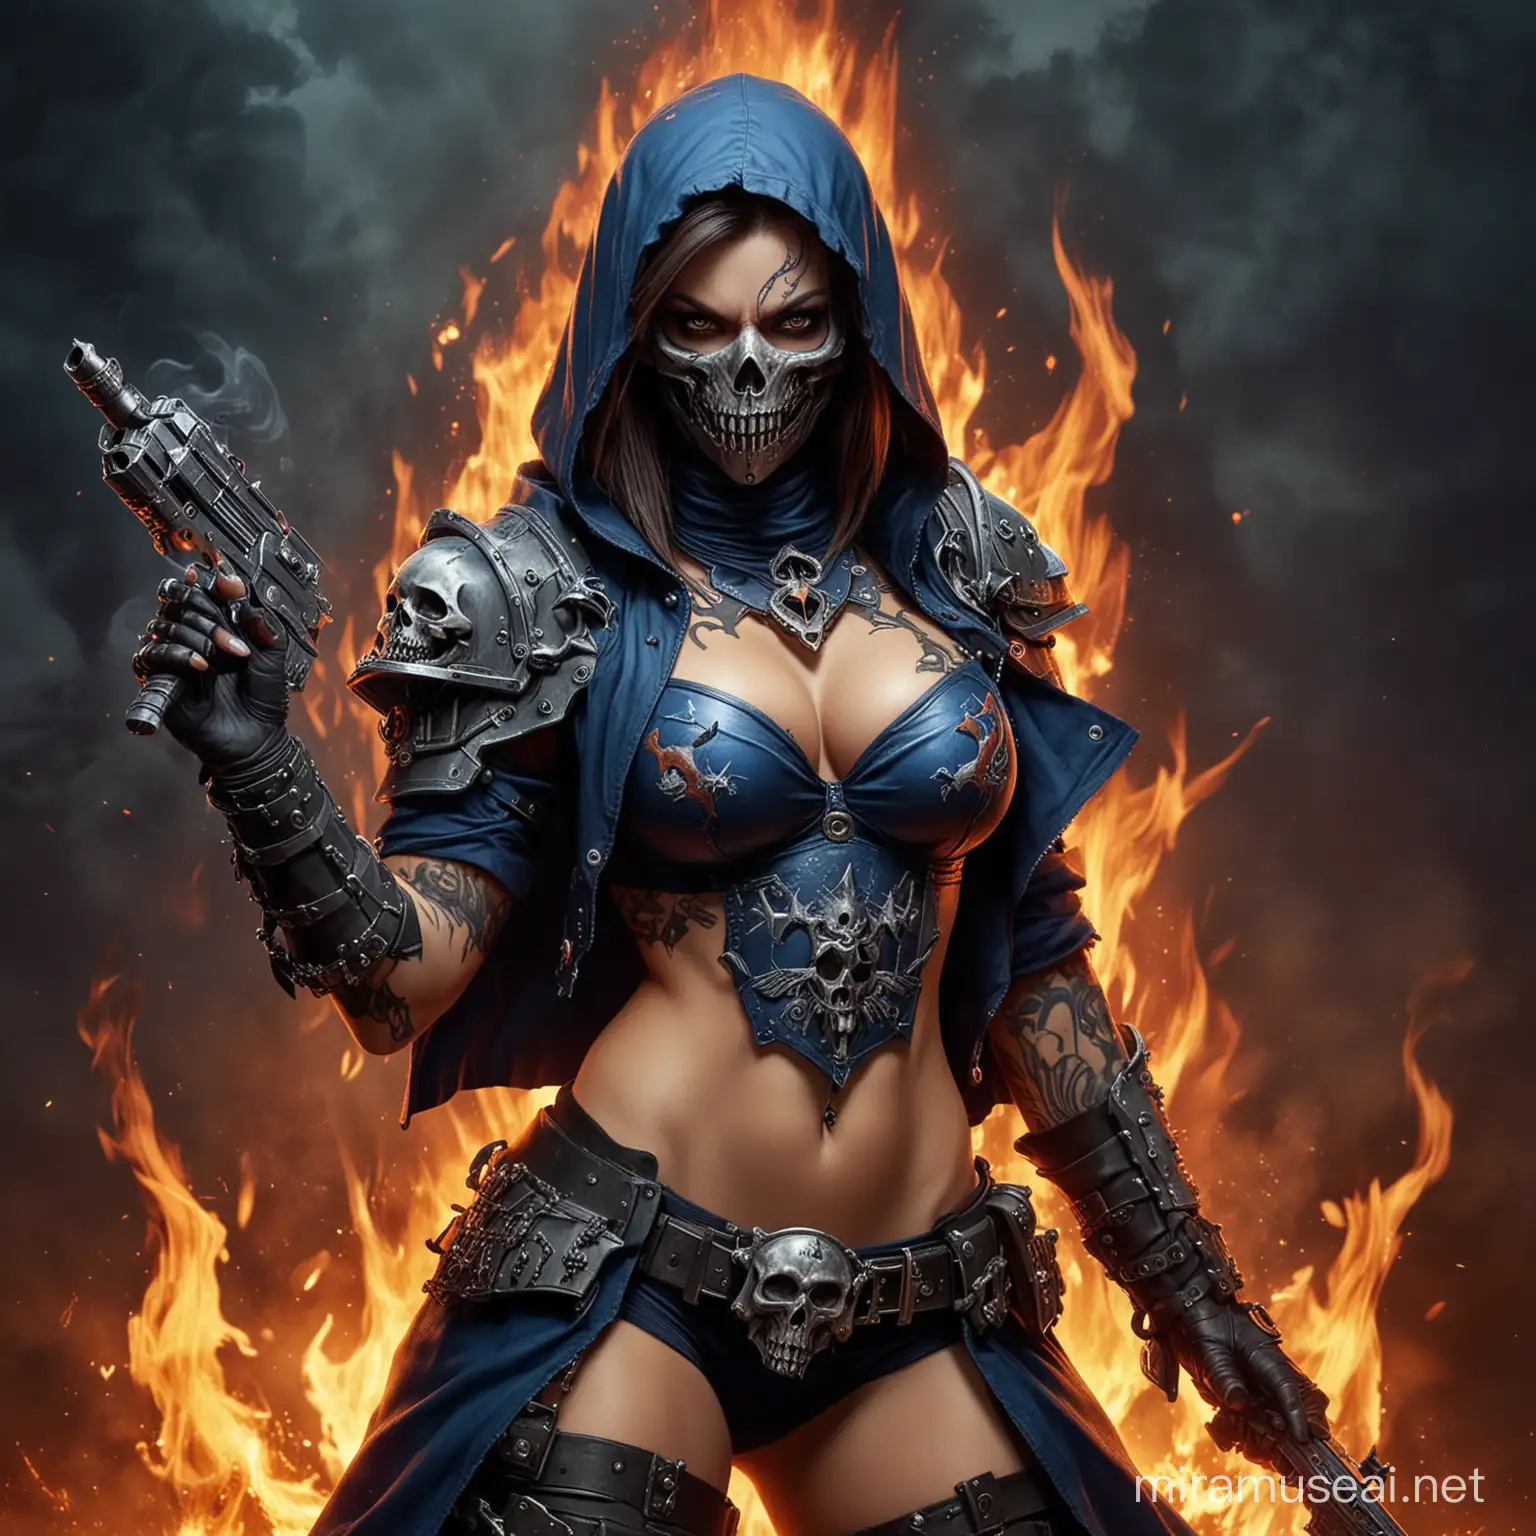 Seductive Chaos Cultist Leader with Warhammer 40k Theme